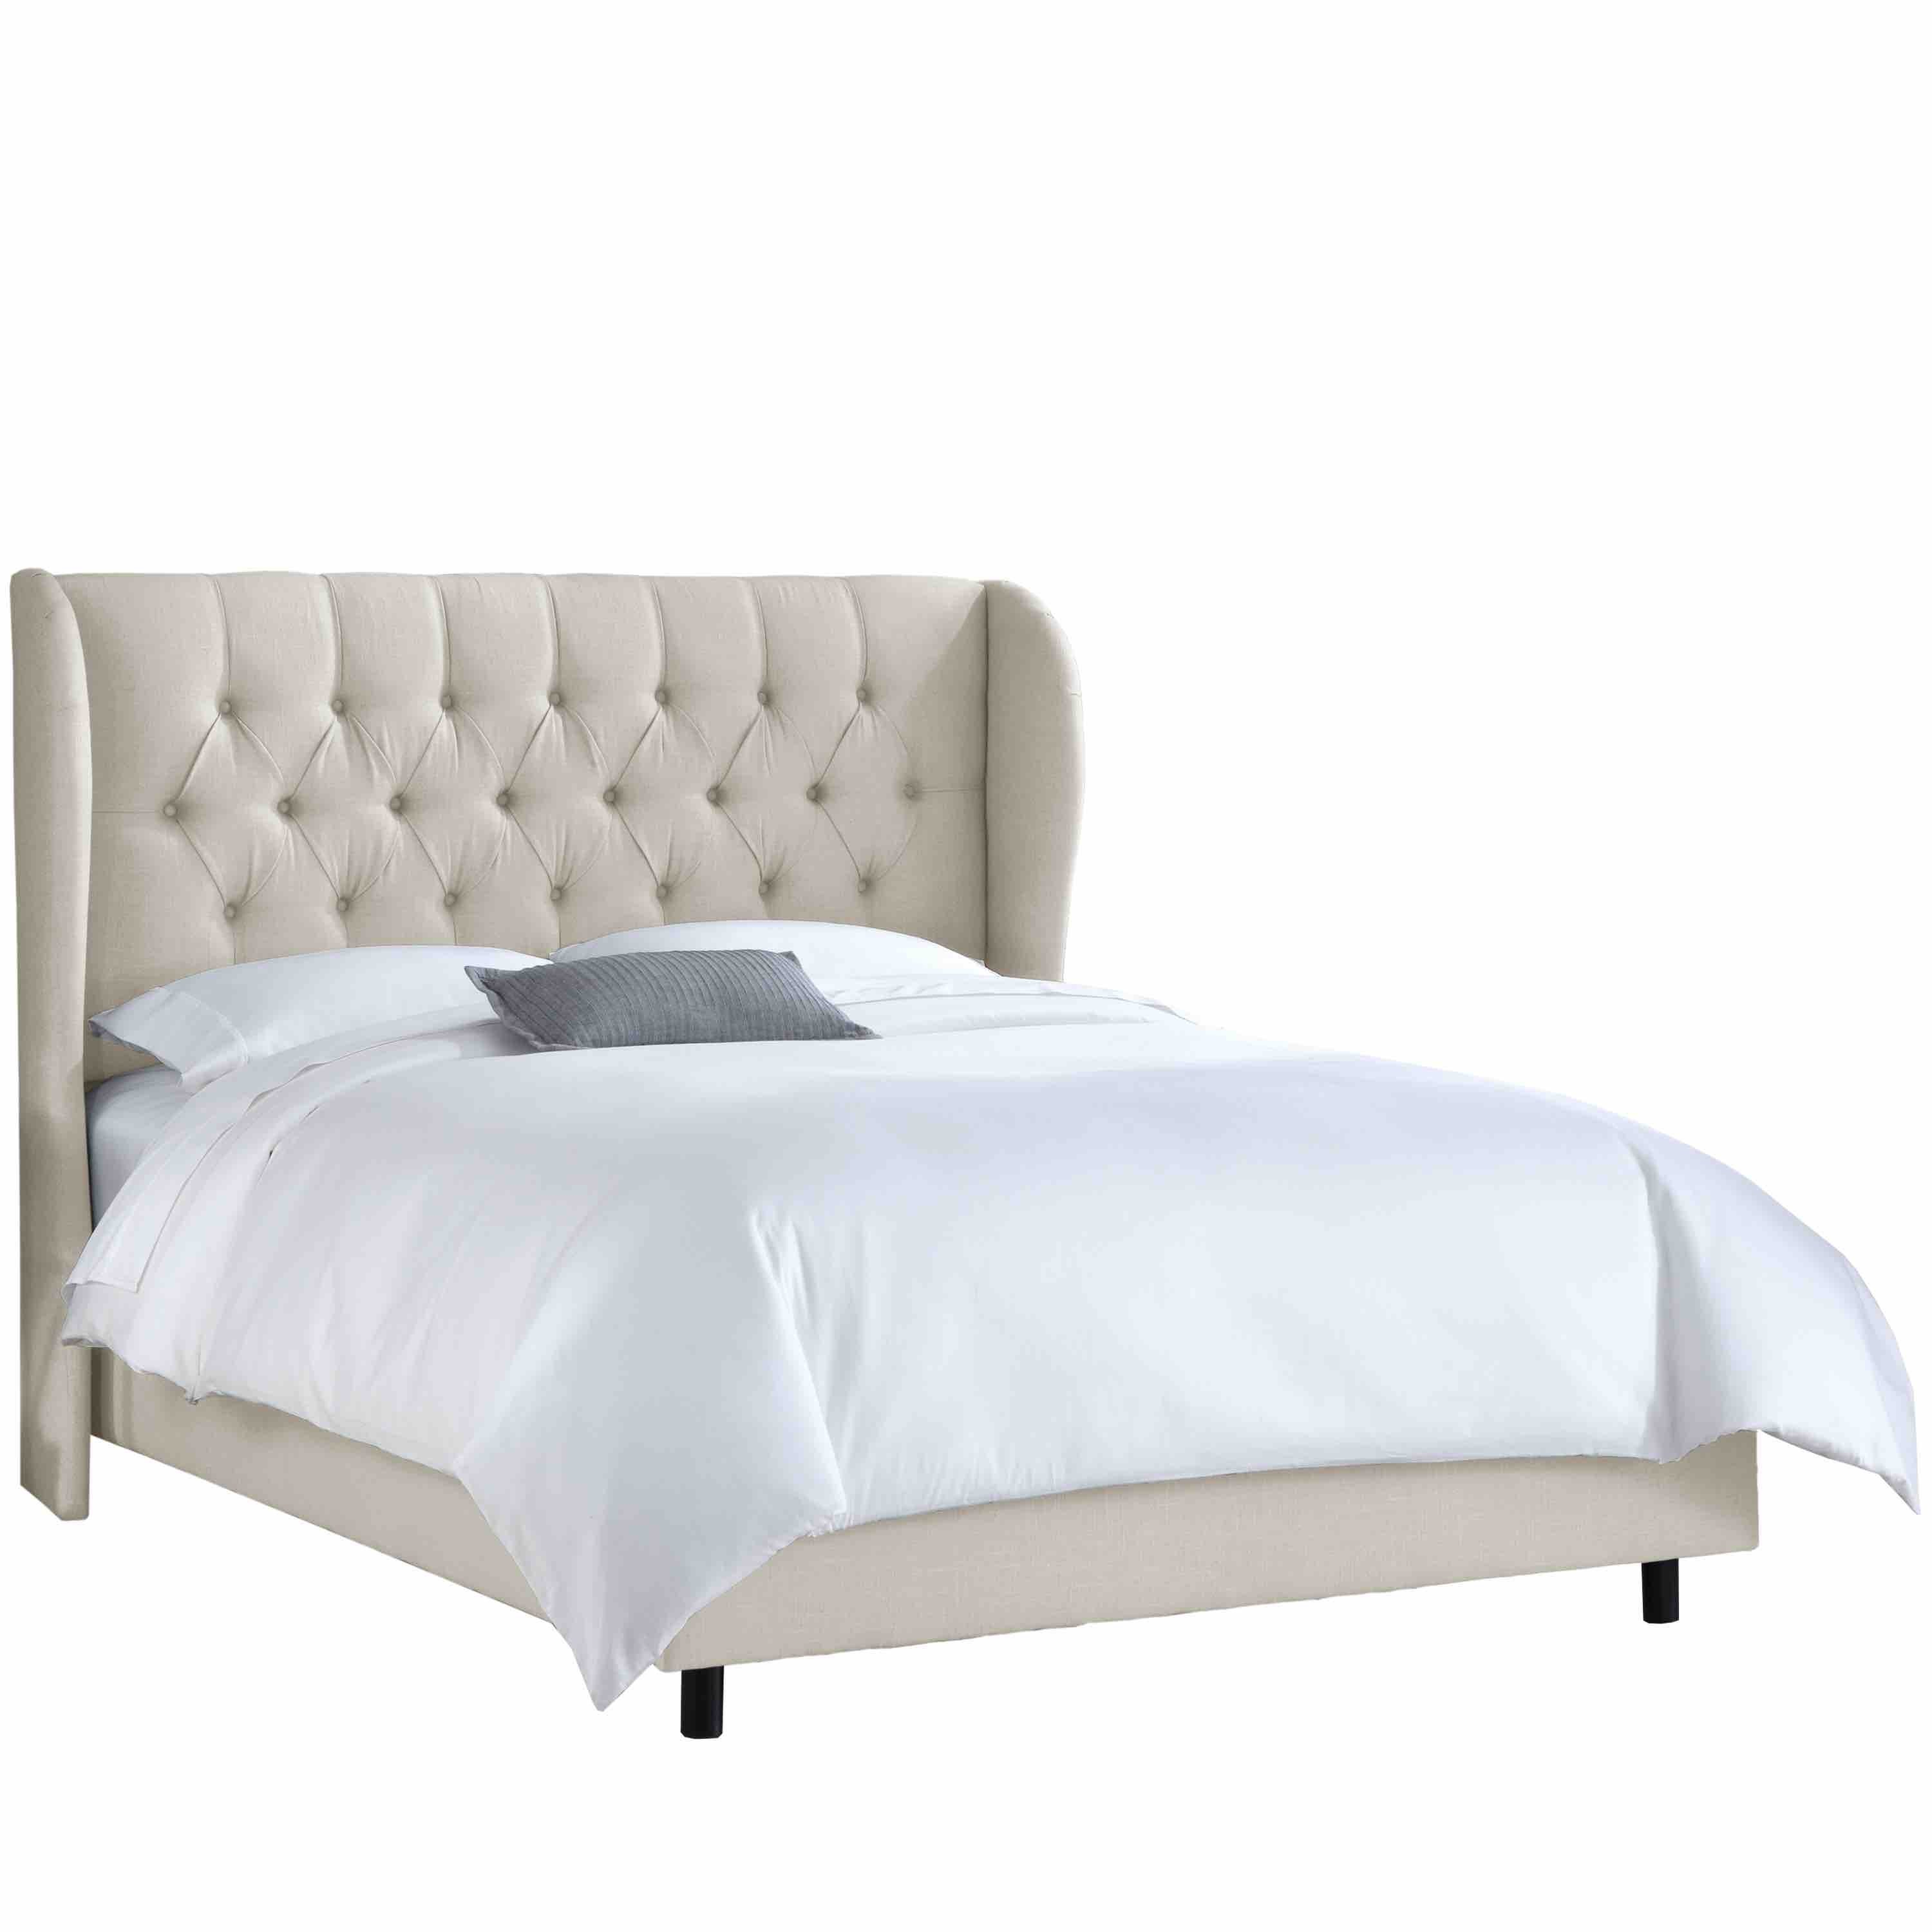 King Tufted Wingback Bed in Linen talc - Third & Vine